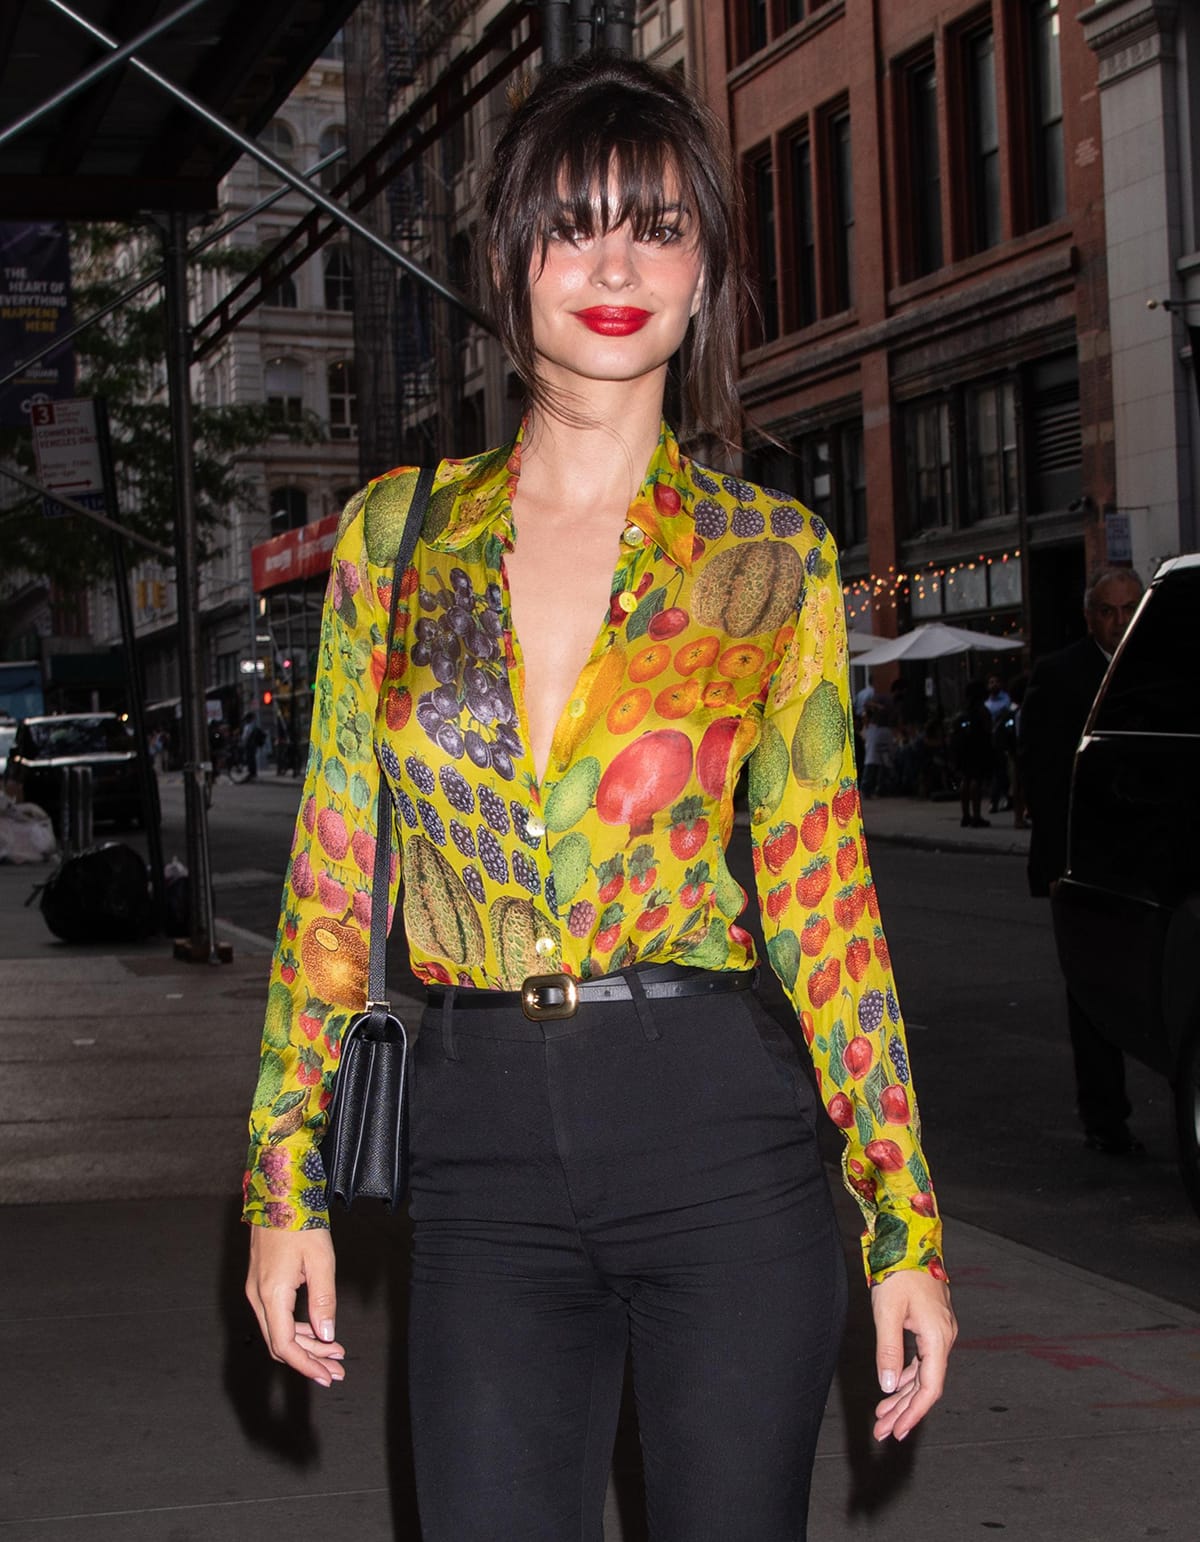 Emily Ratajkowski looks hot with red lipstick and a messy bun with wispy bangs